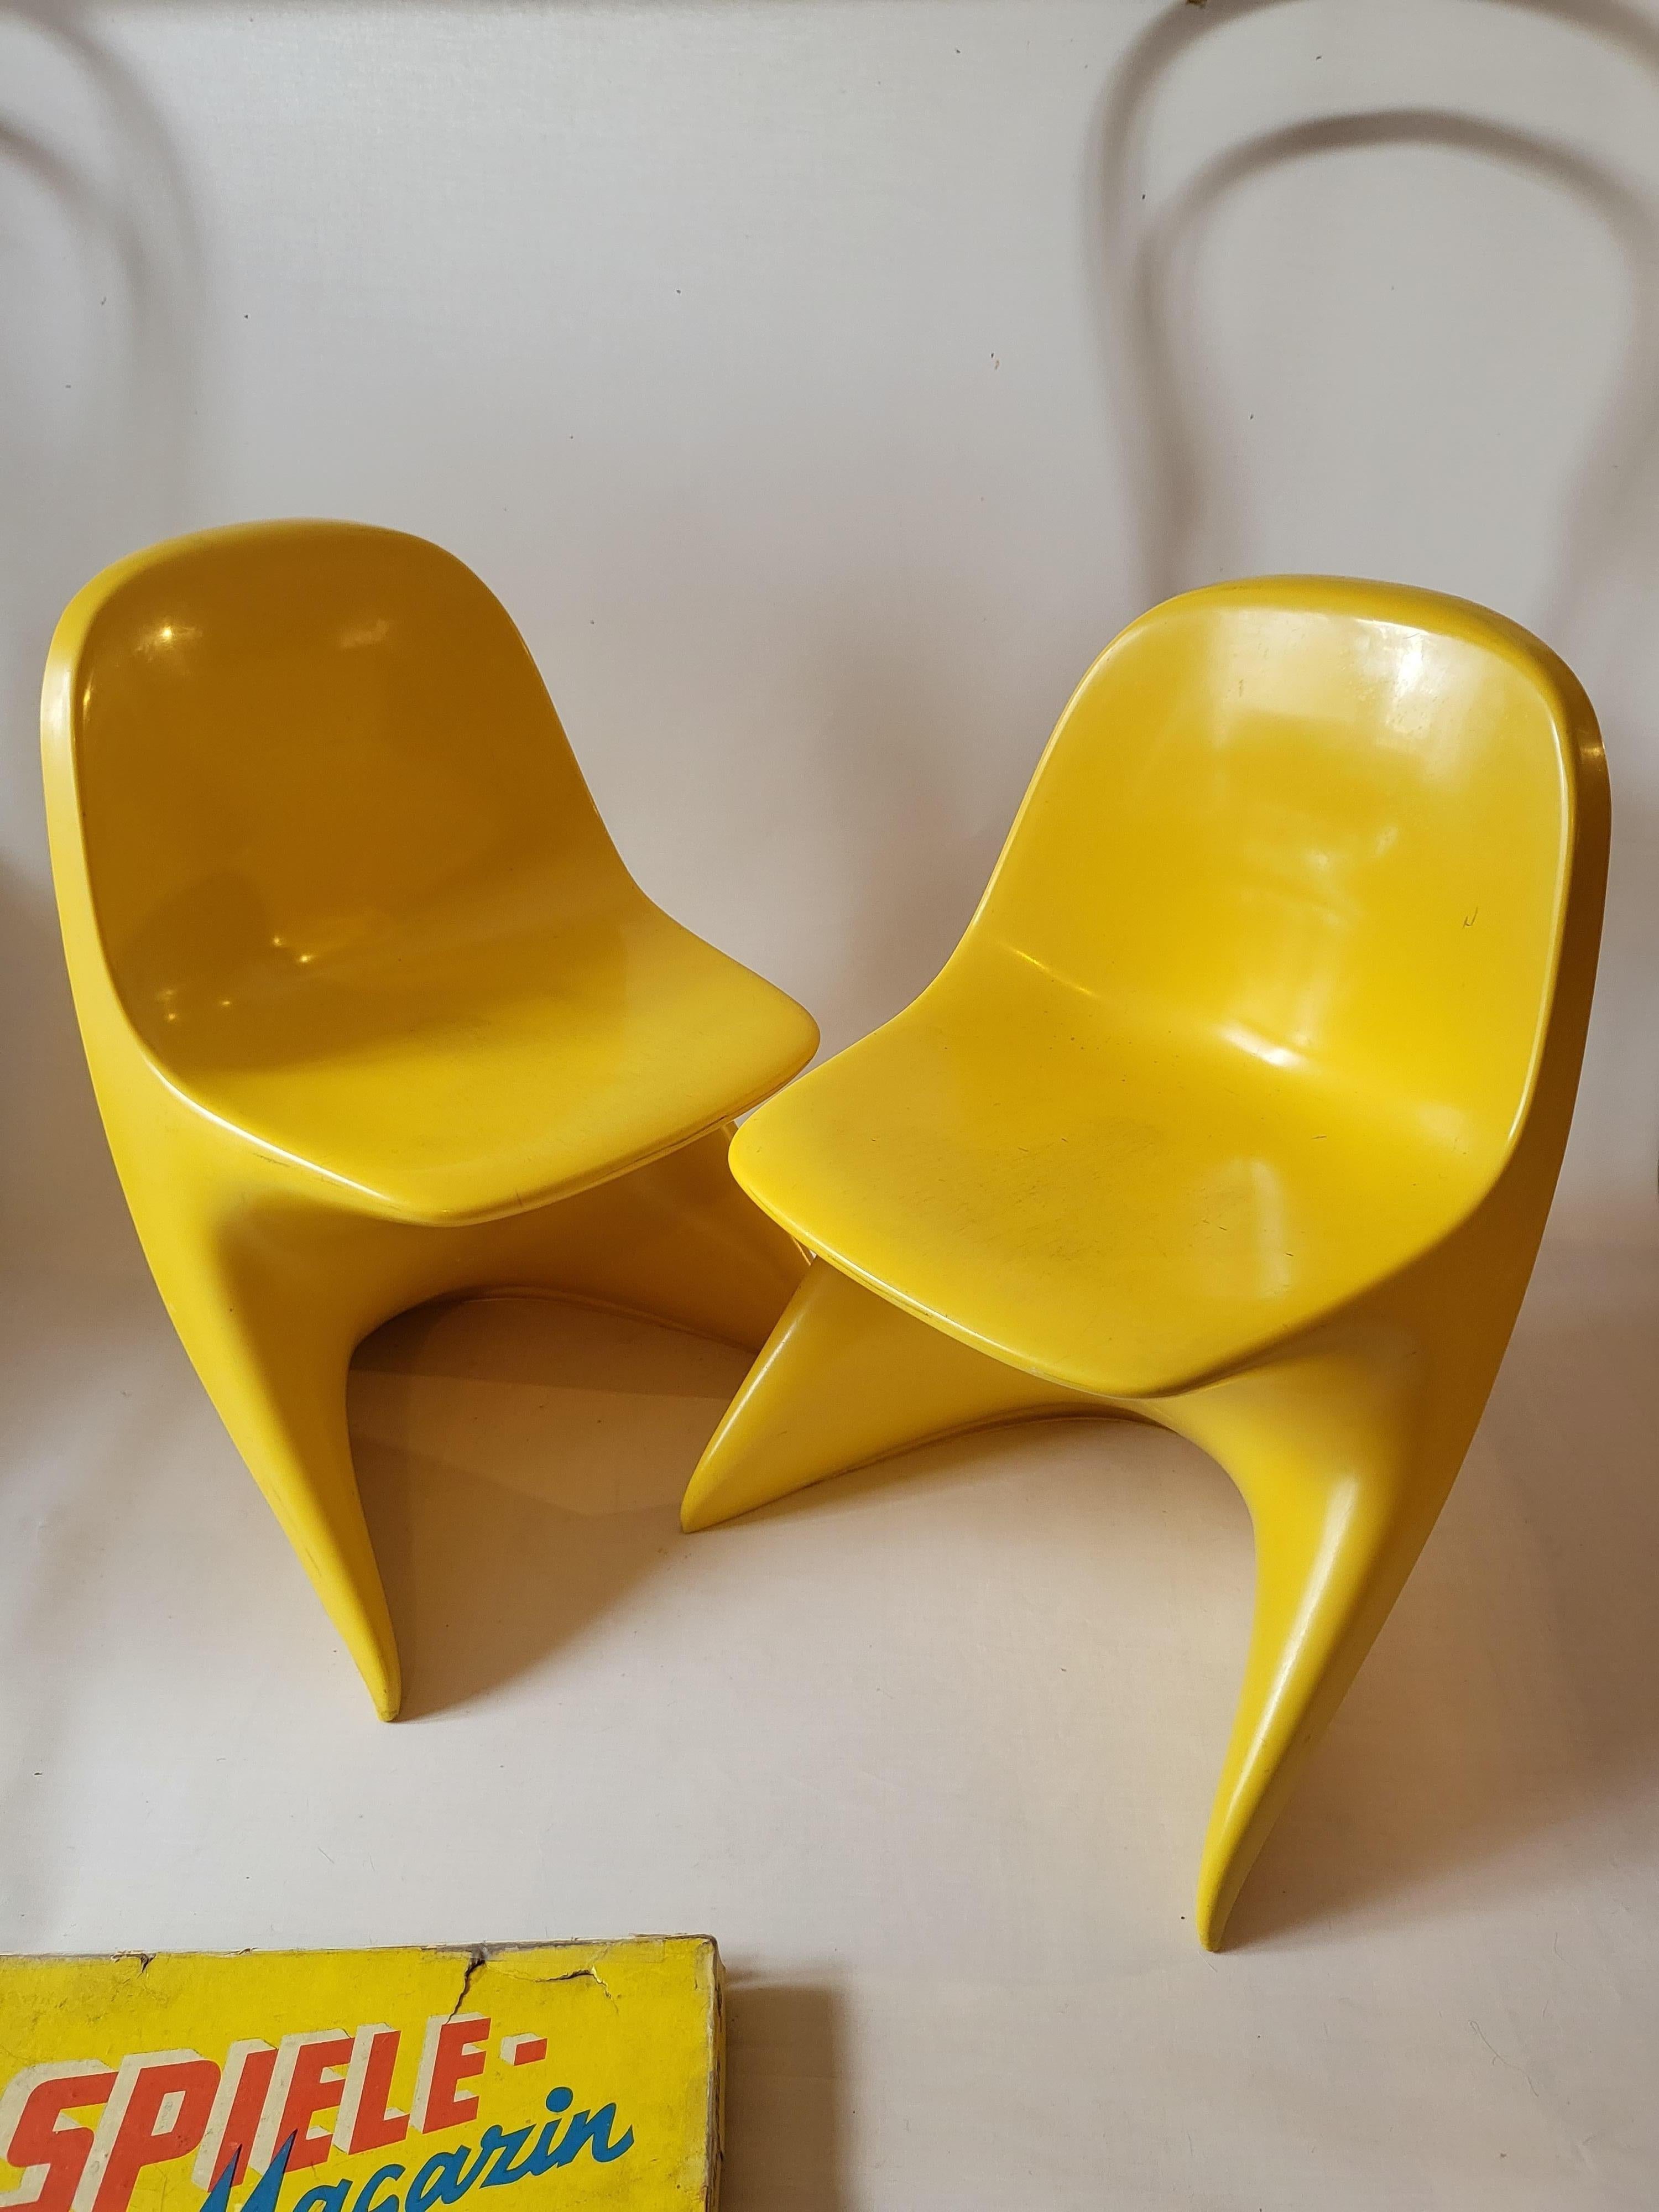 These chairs are made of plastic and are stackable. Both chairs are stamped 